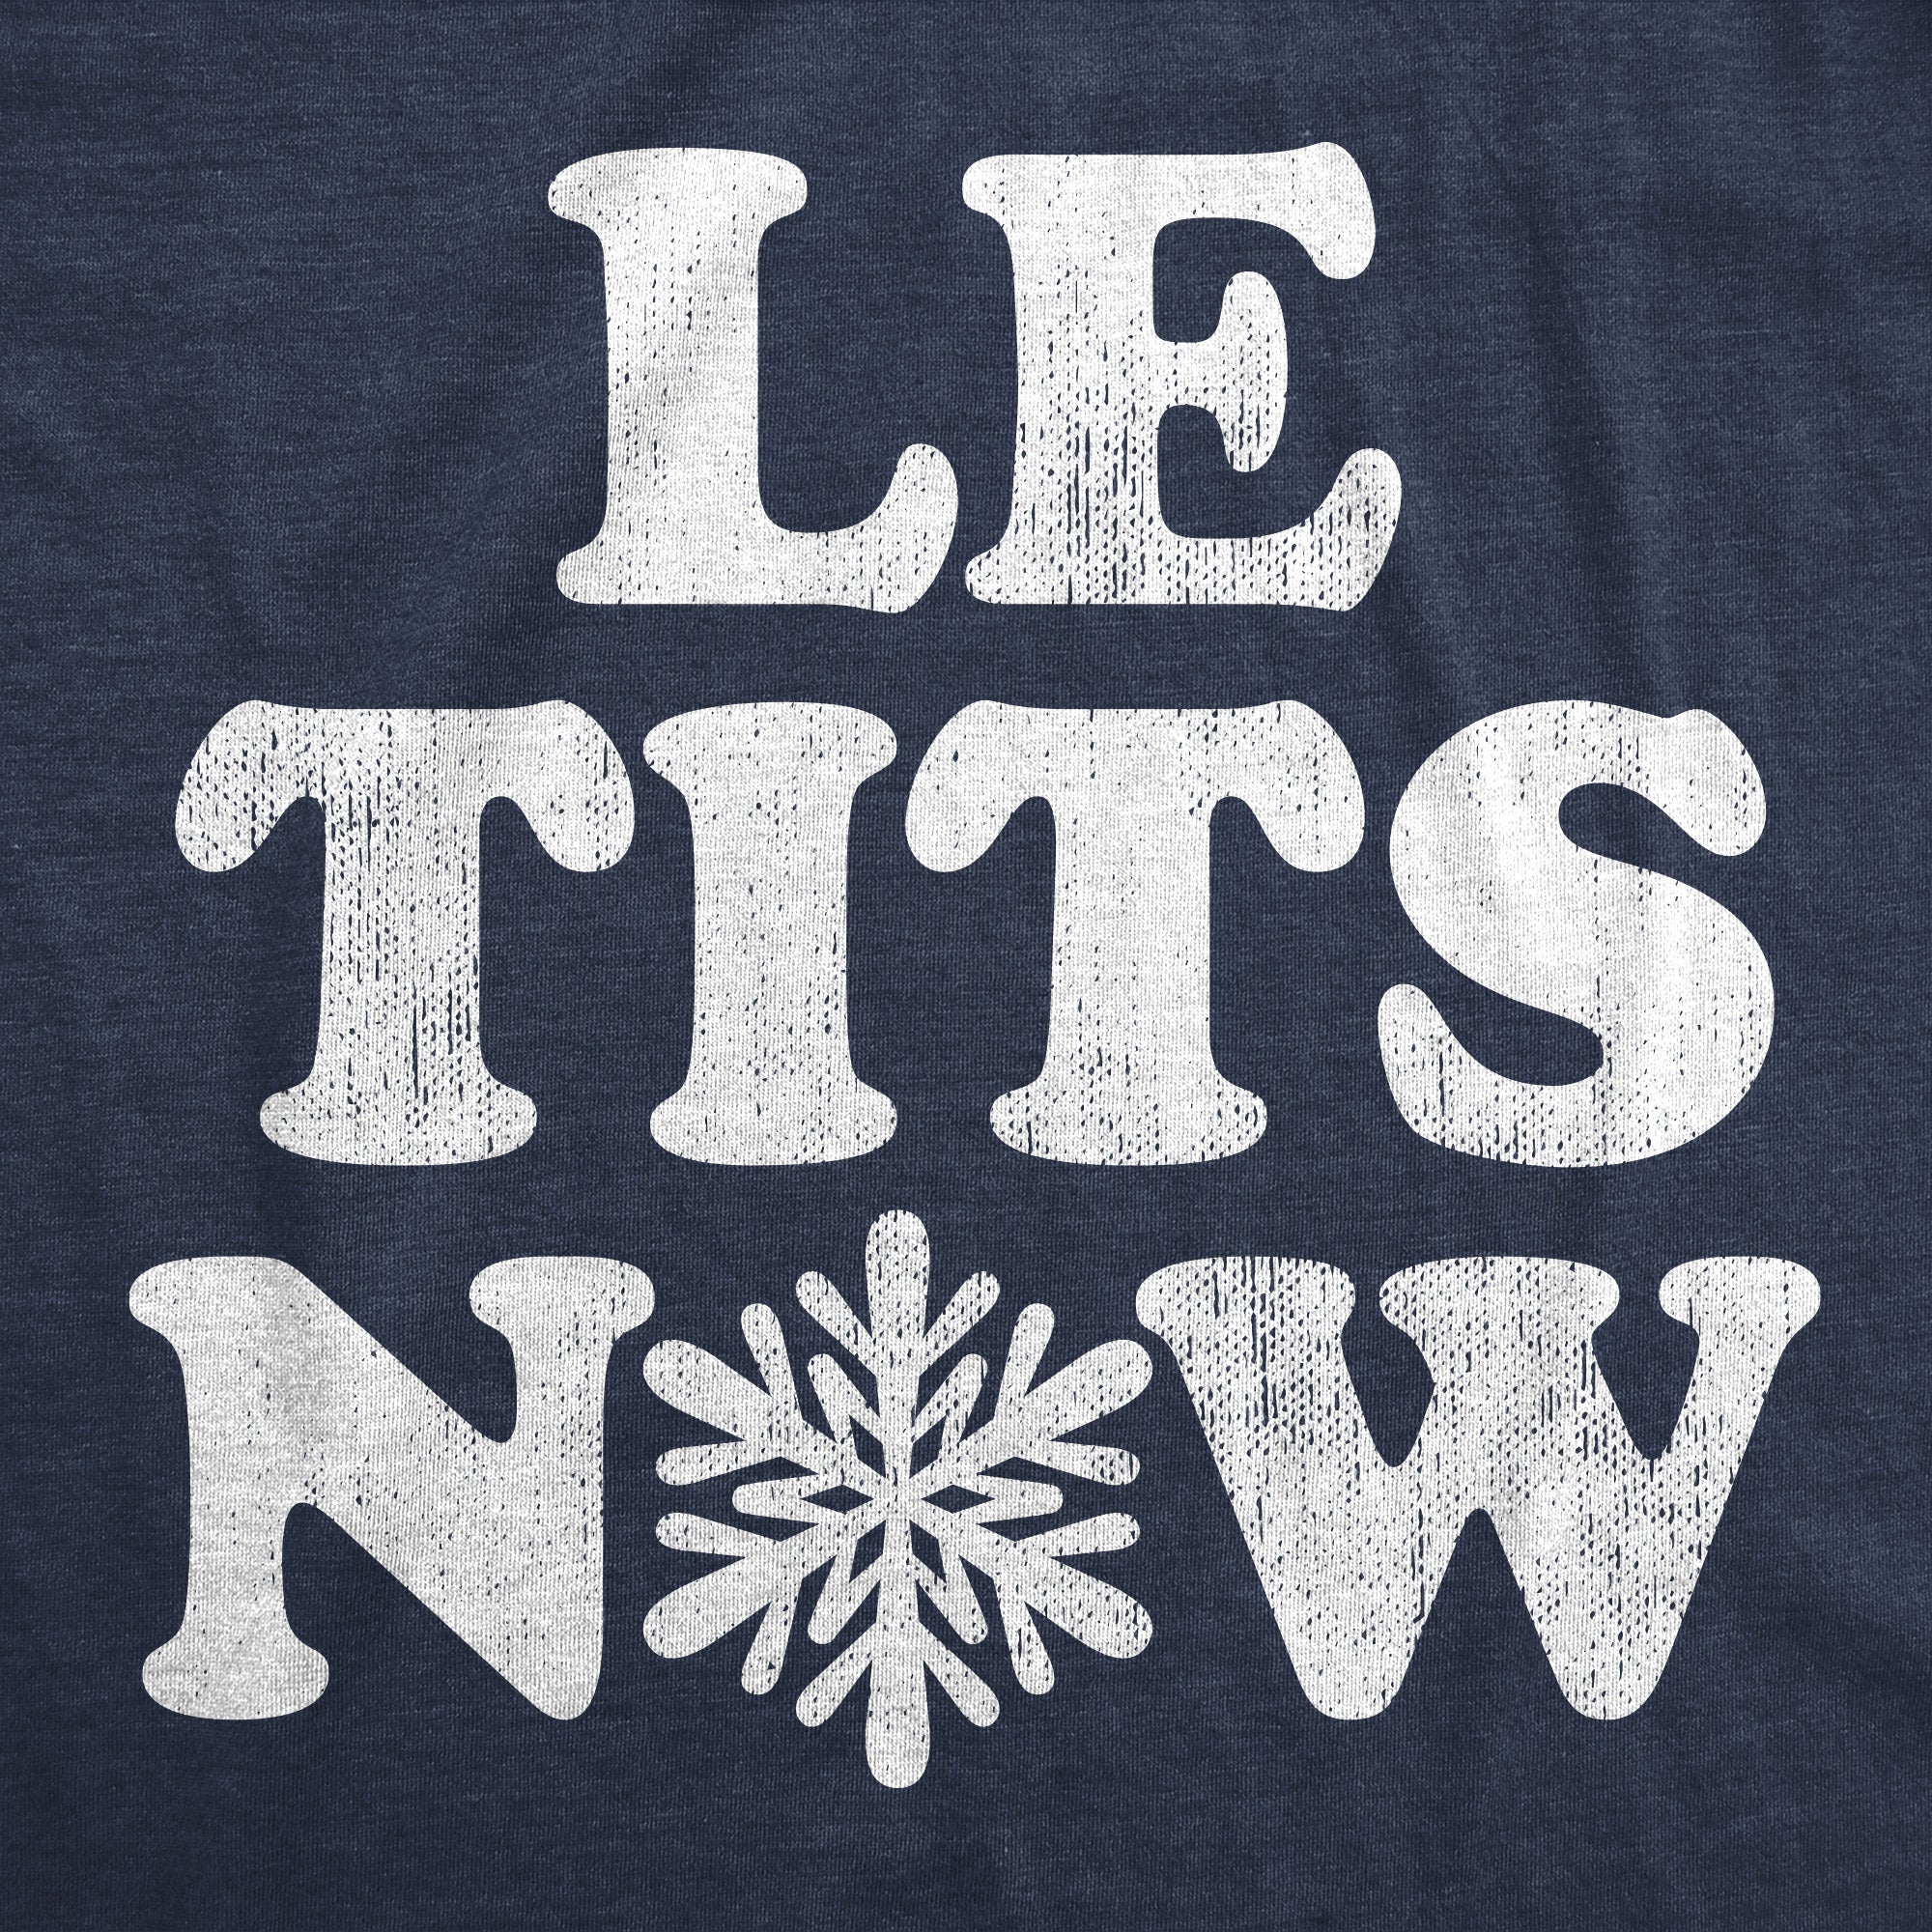 Funny Heather Navy - TITS Le Tits Now Womens T Shirt Nerdy Christmas Sarcastic Tee